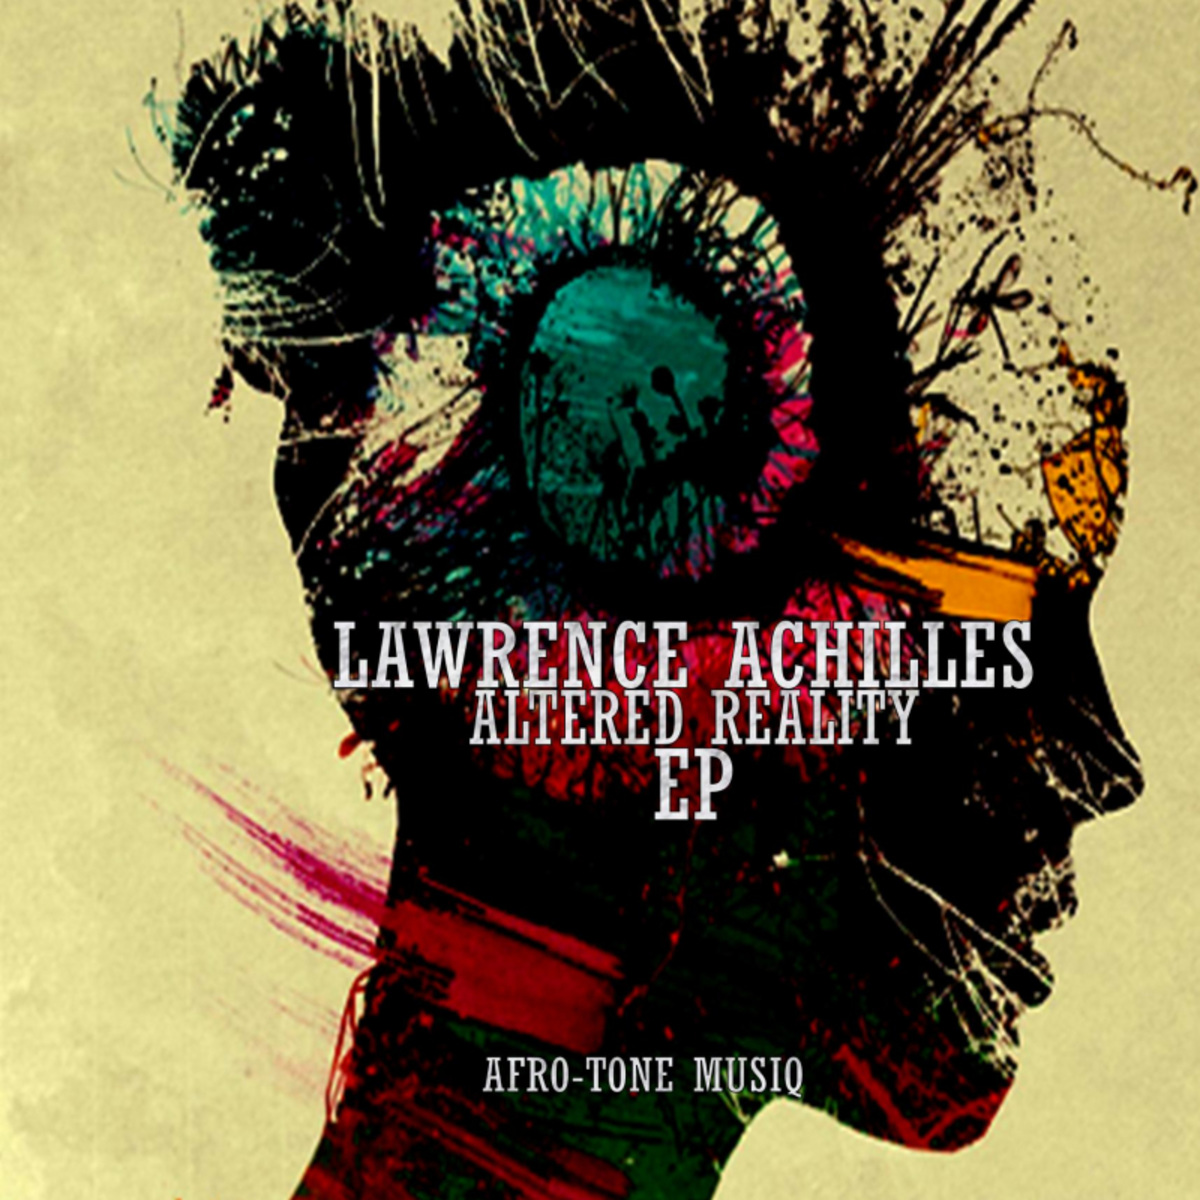 Lawrence Achilles - Altered Reality / Afro tone musiq